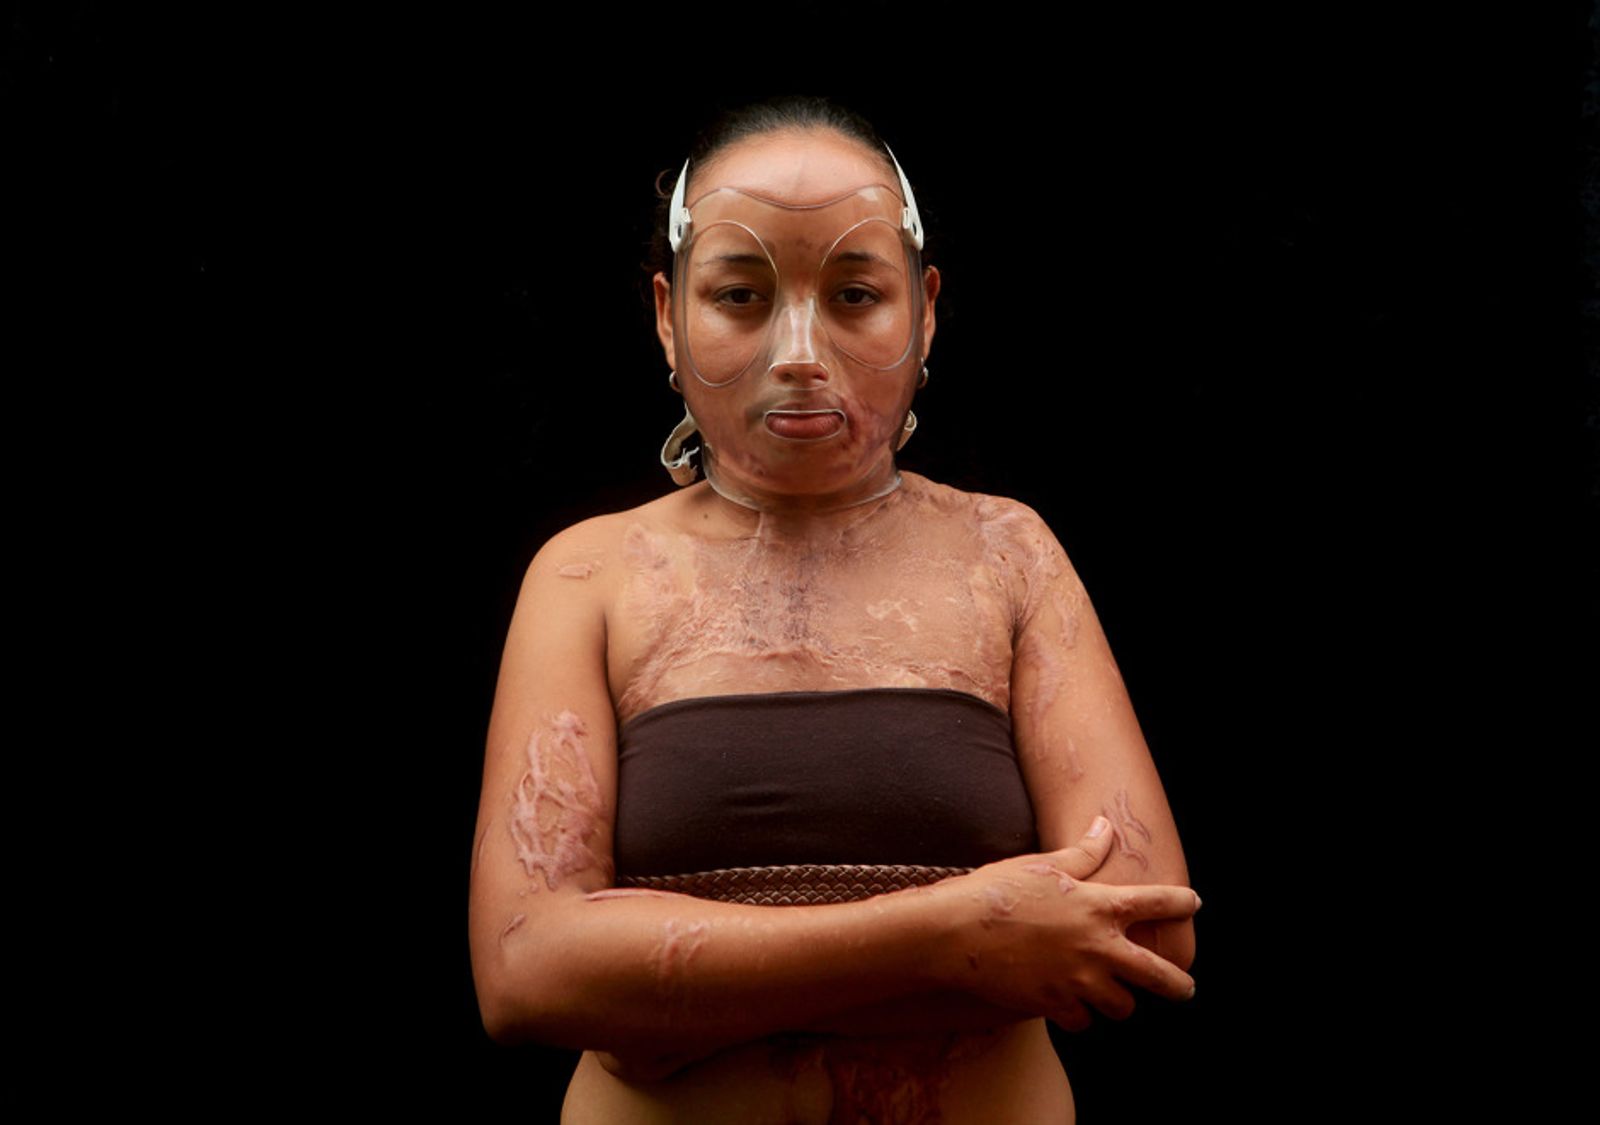 © Orlando Barria Photos - Image from the Women victims of acid photography project